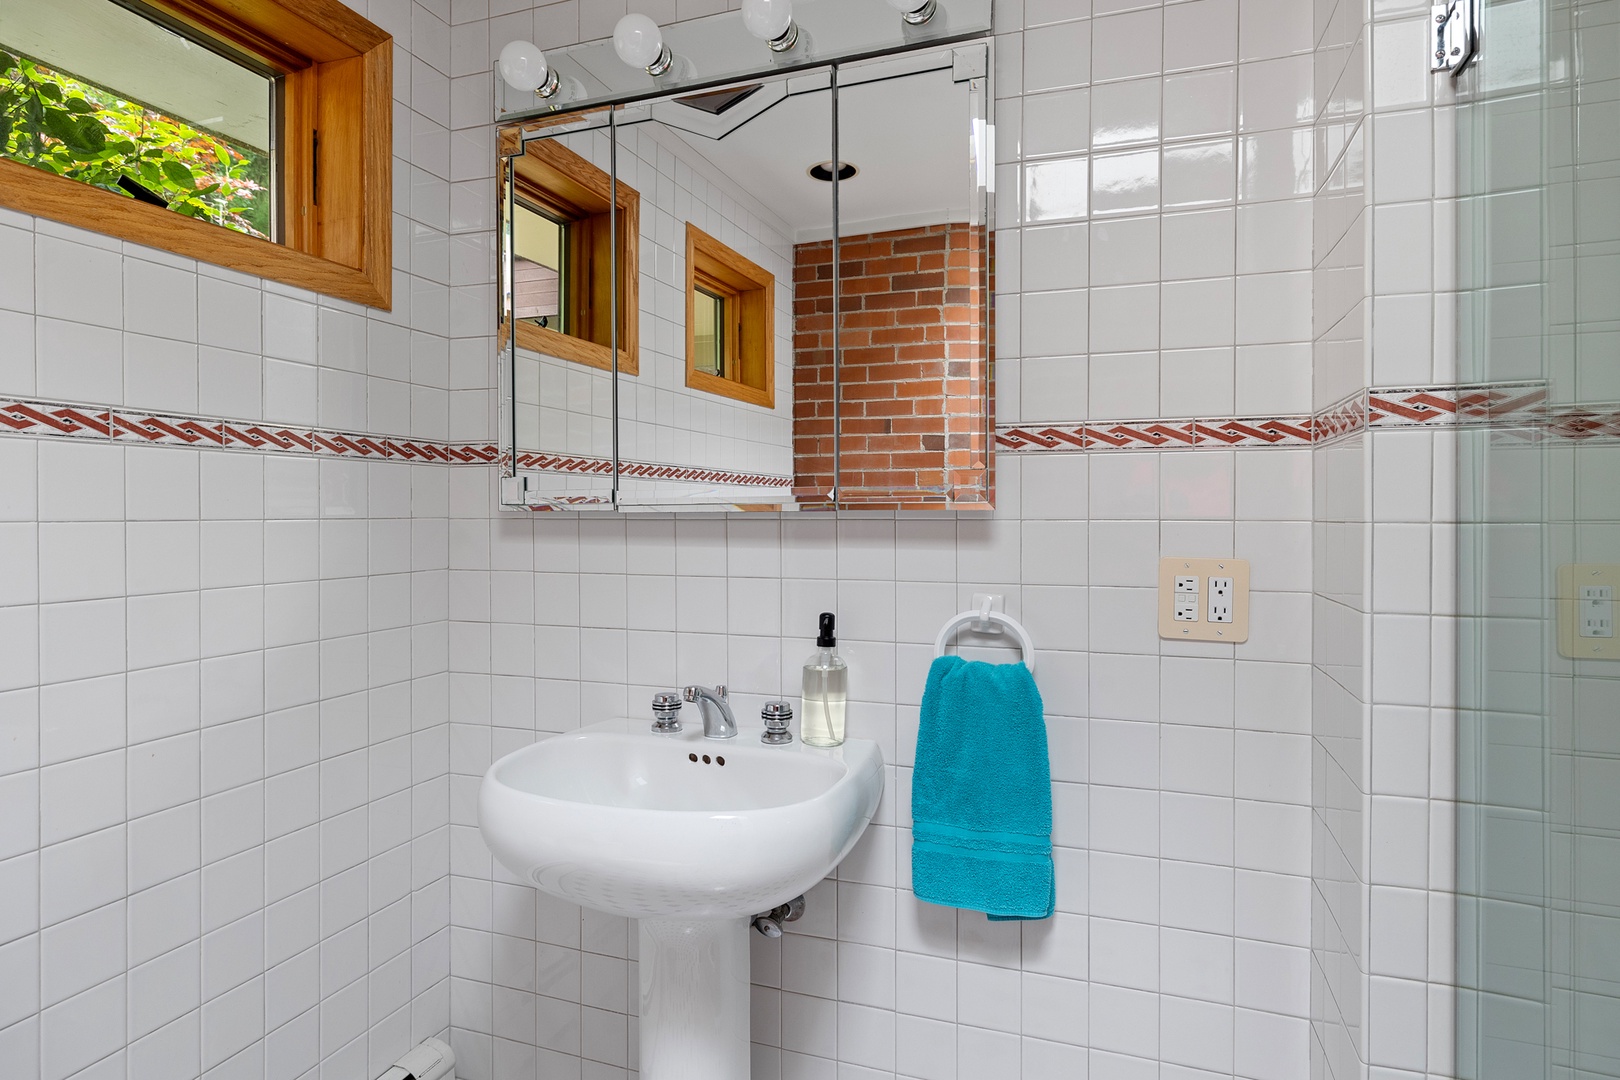 3 full bathrooms keep morning and evening routines running smoothly